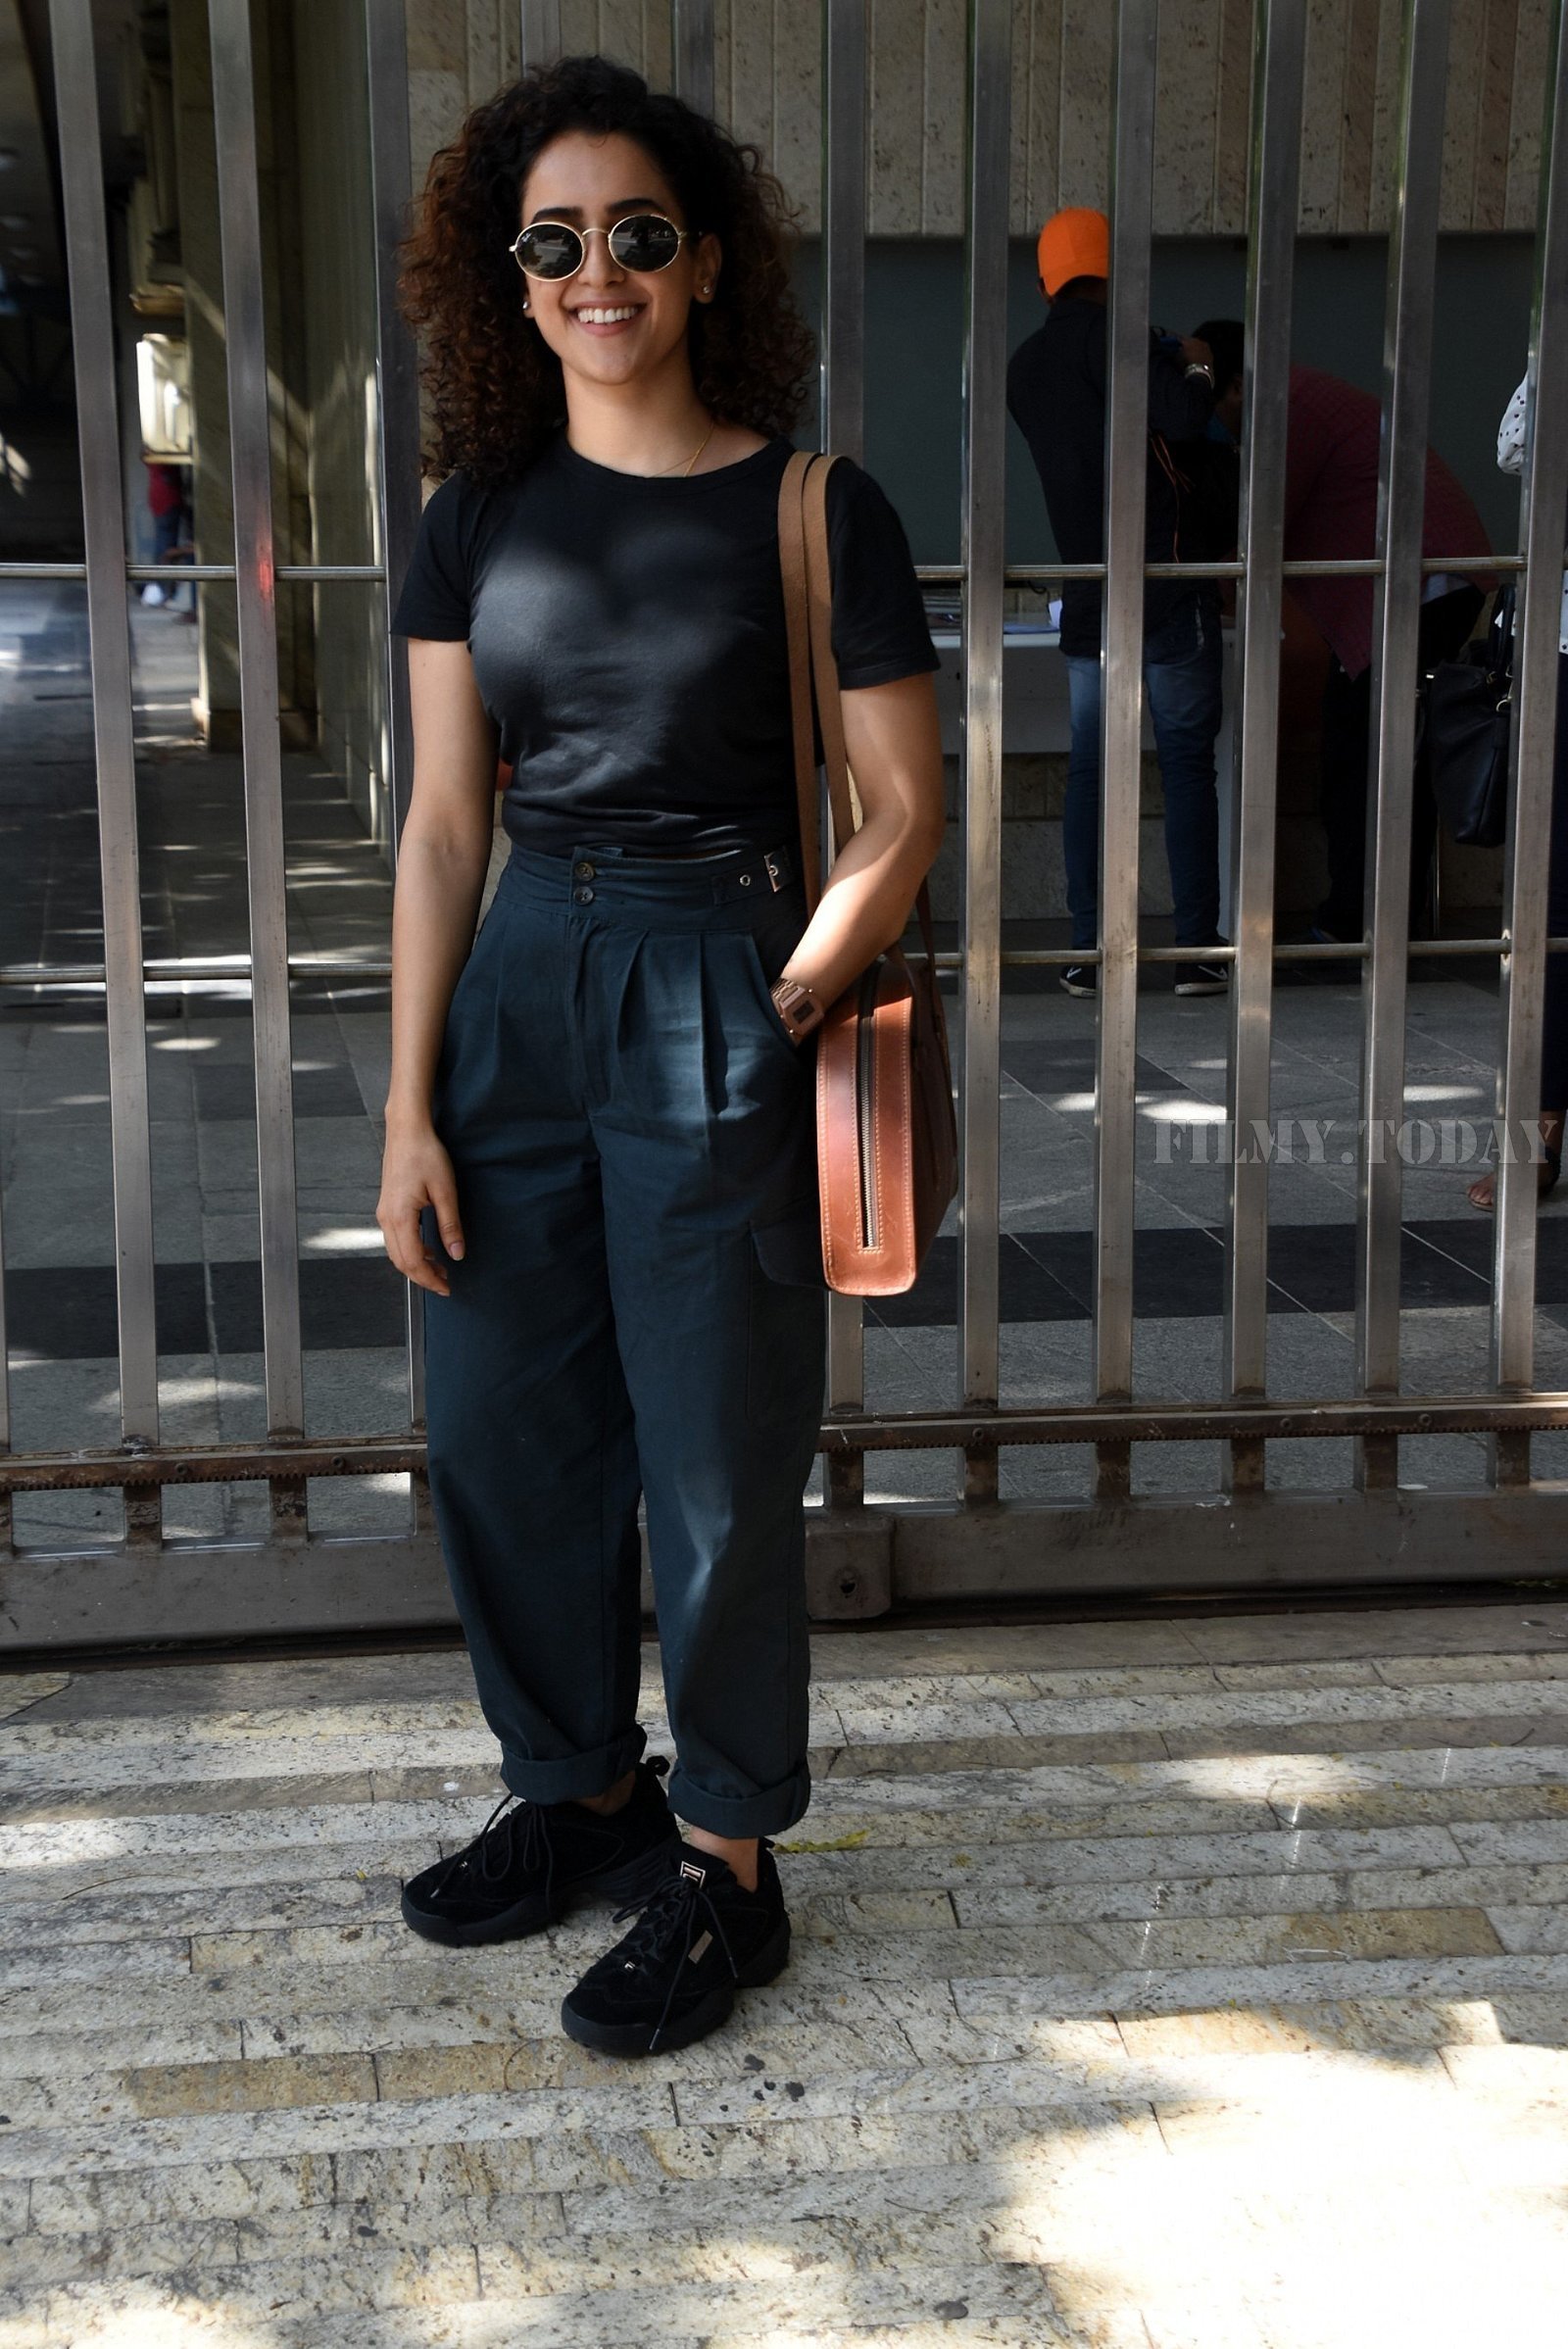 Sanya Malhotra - Photos: Celebs Spotted at Andheri | Picture 1649336